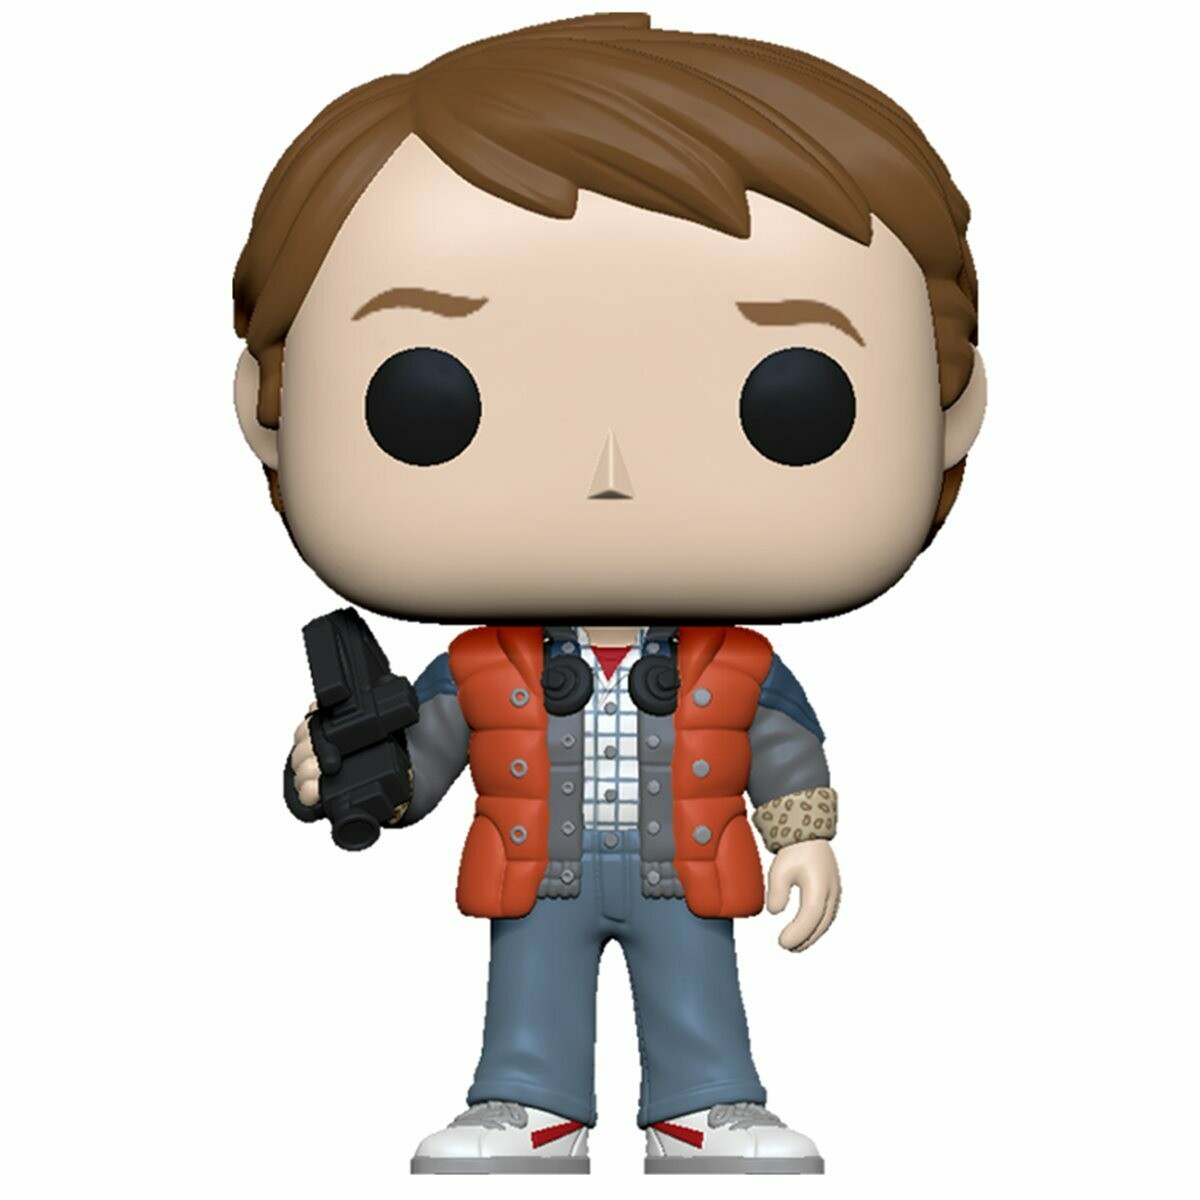 Funko Back to the Future Marty in Puffy Vest Pop! Vinyl Figure